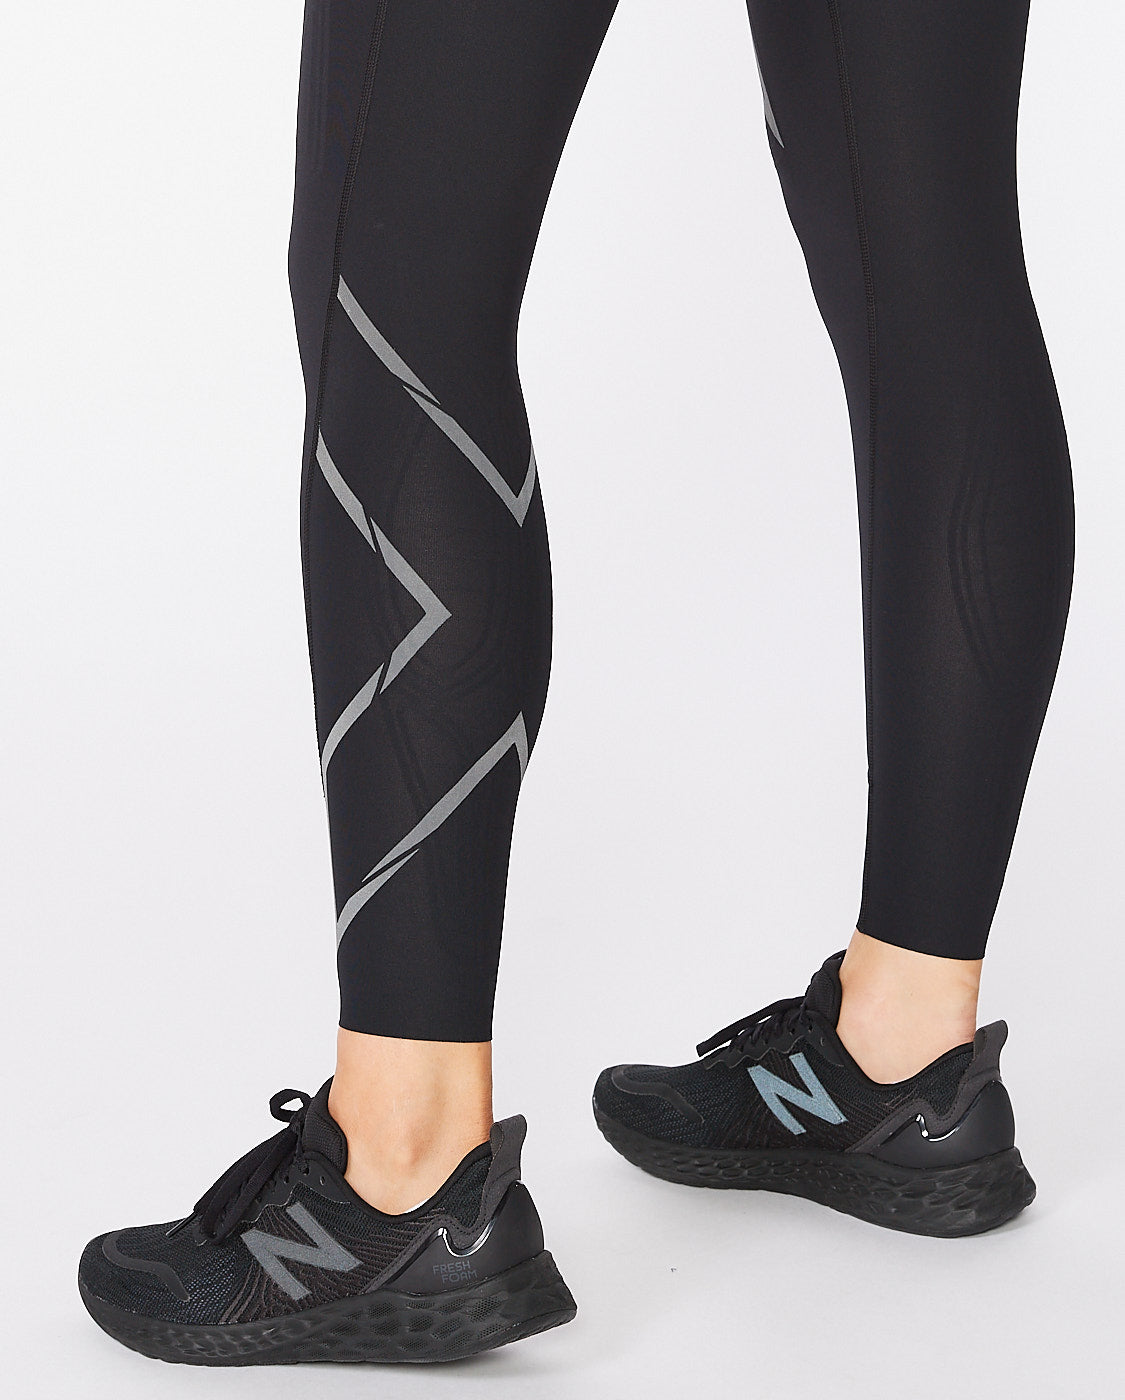 Calzas Compresión Mujer Light Speed Mid-Rise Compression Tights - Blac